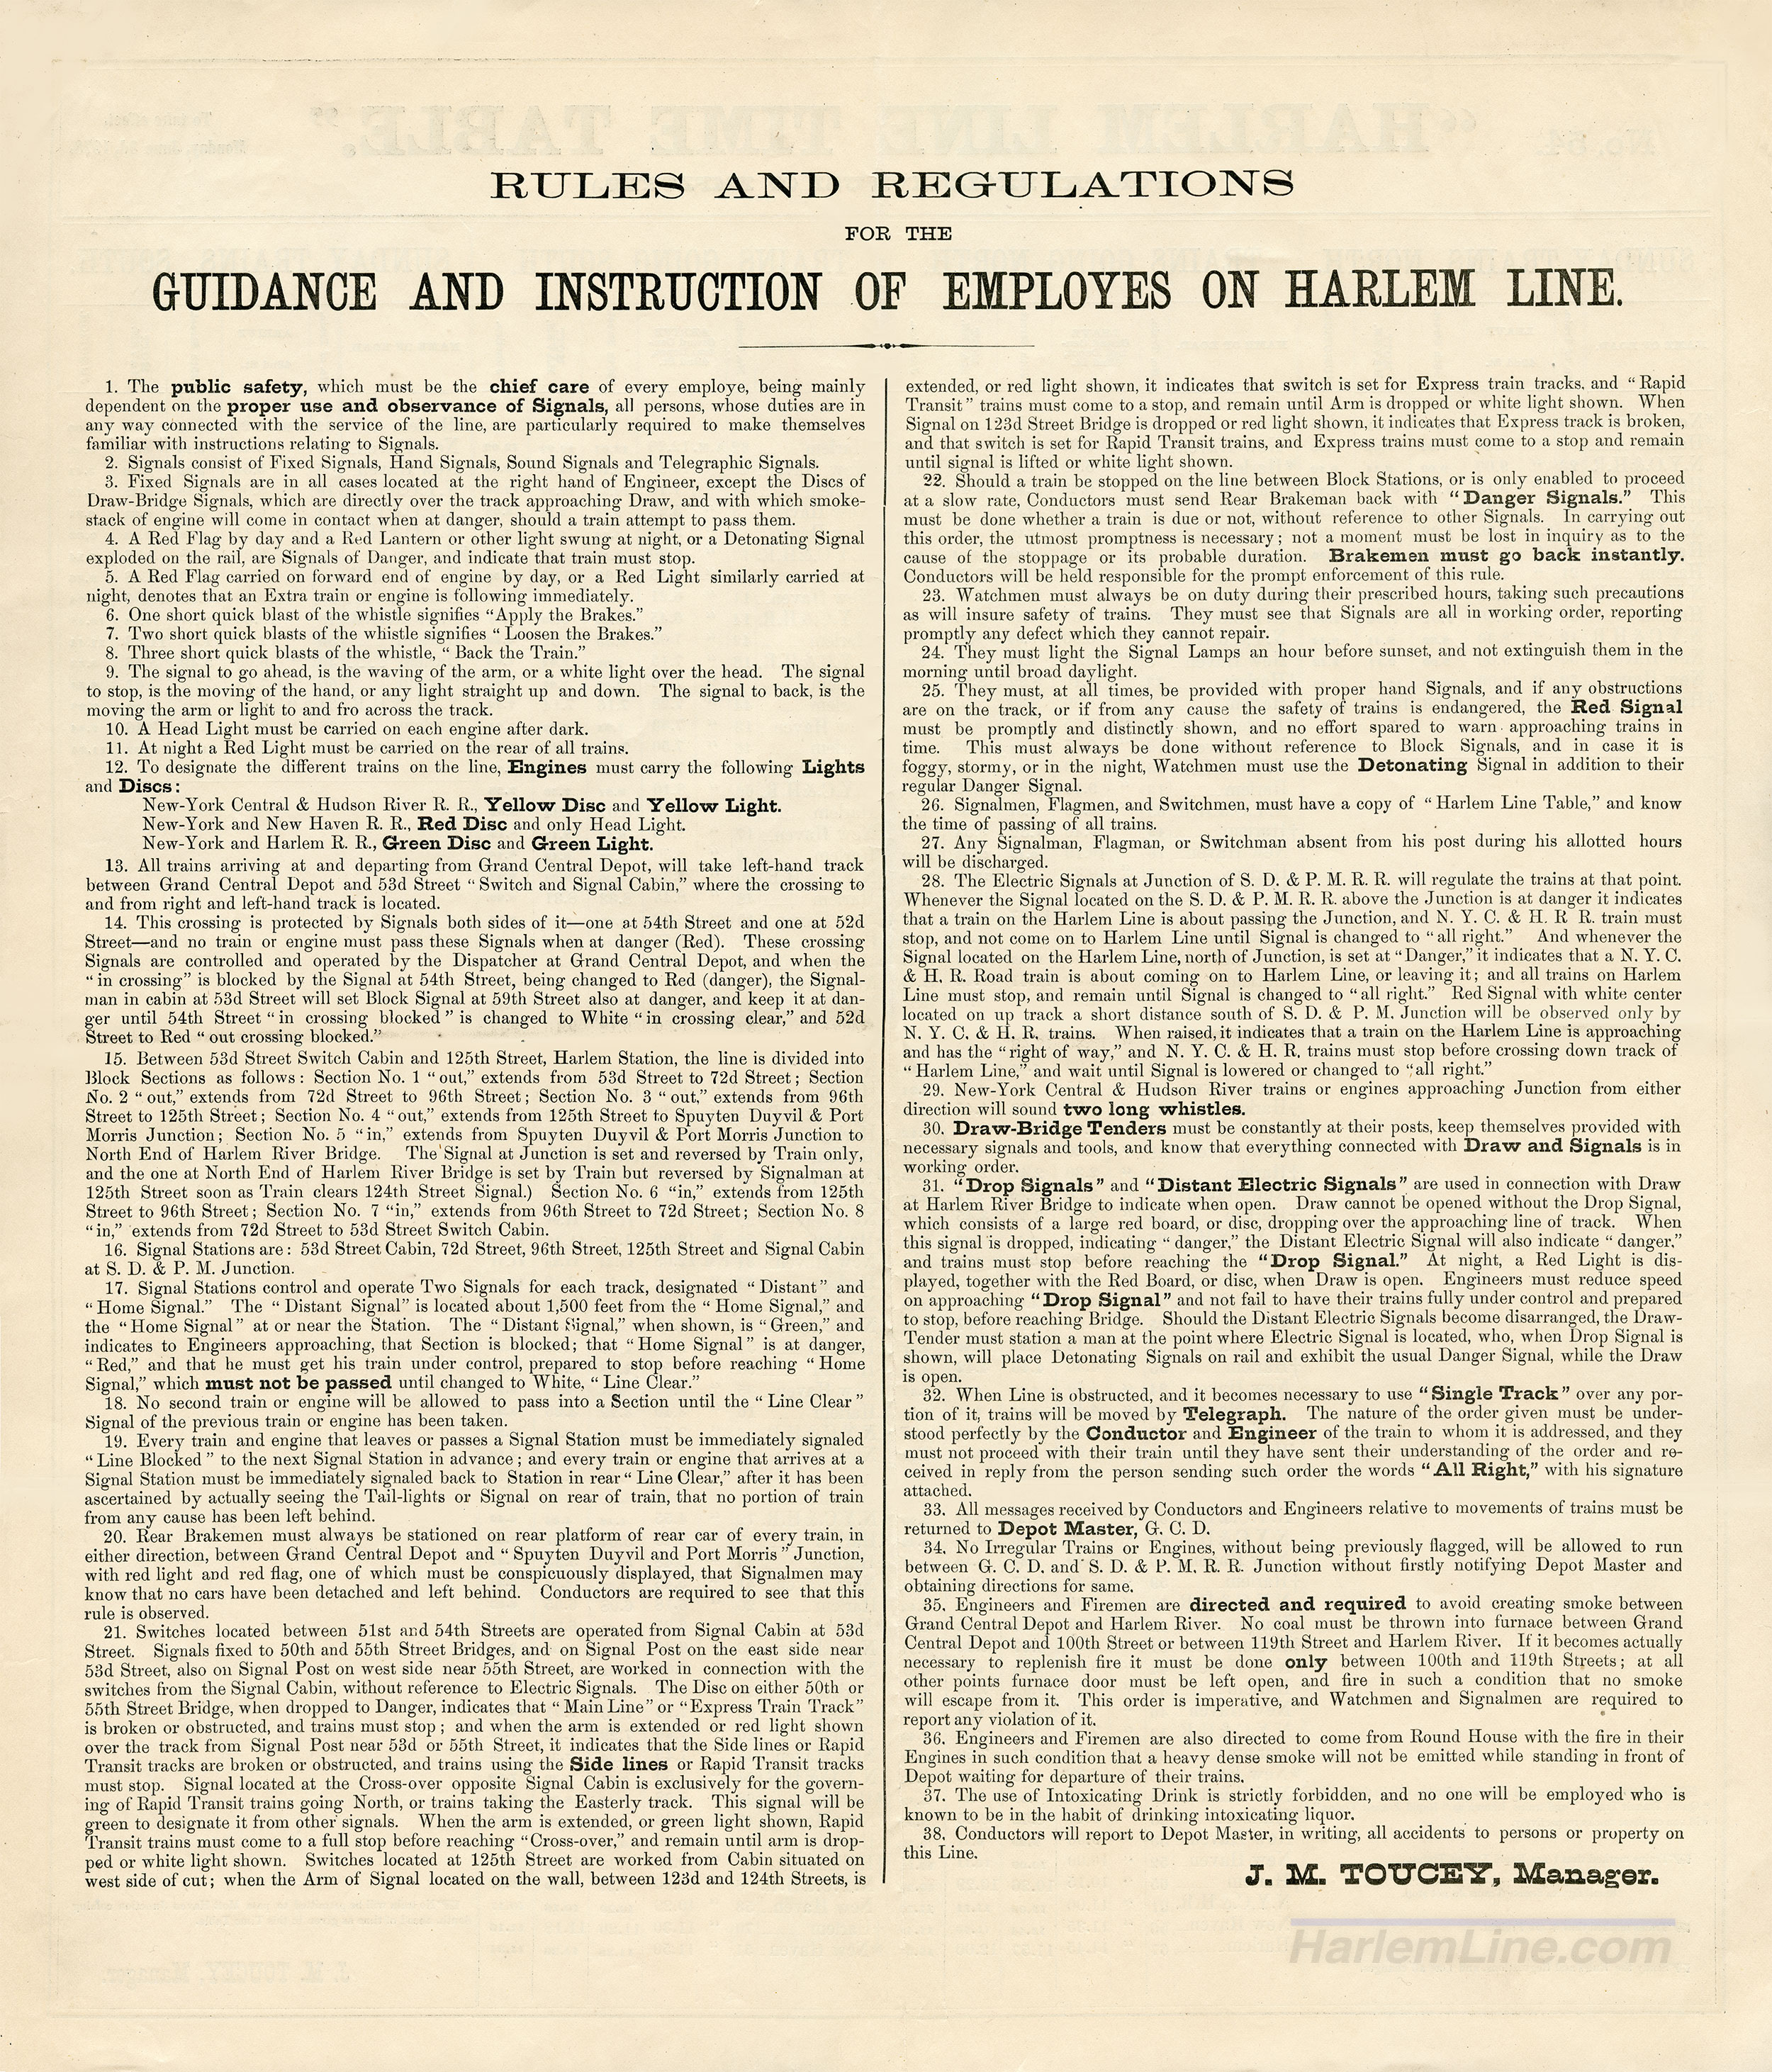 1878 Guidance and Instruction of Employes on the Harlem Line